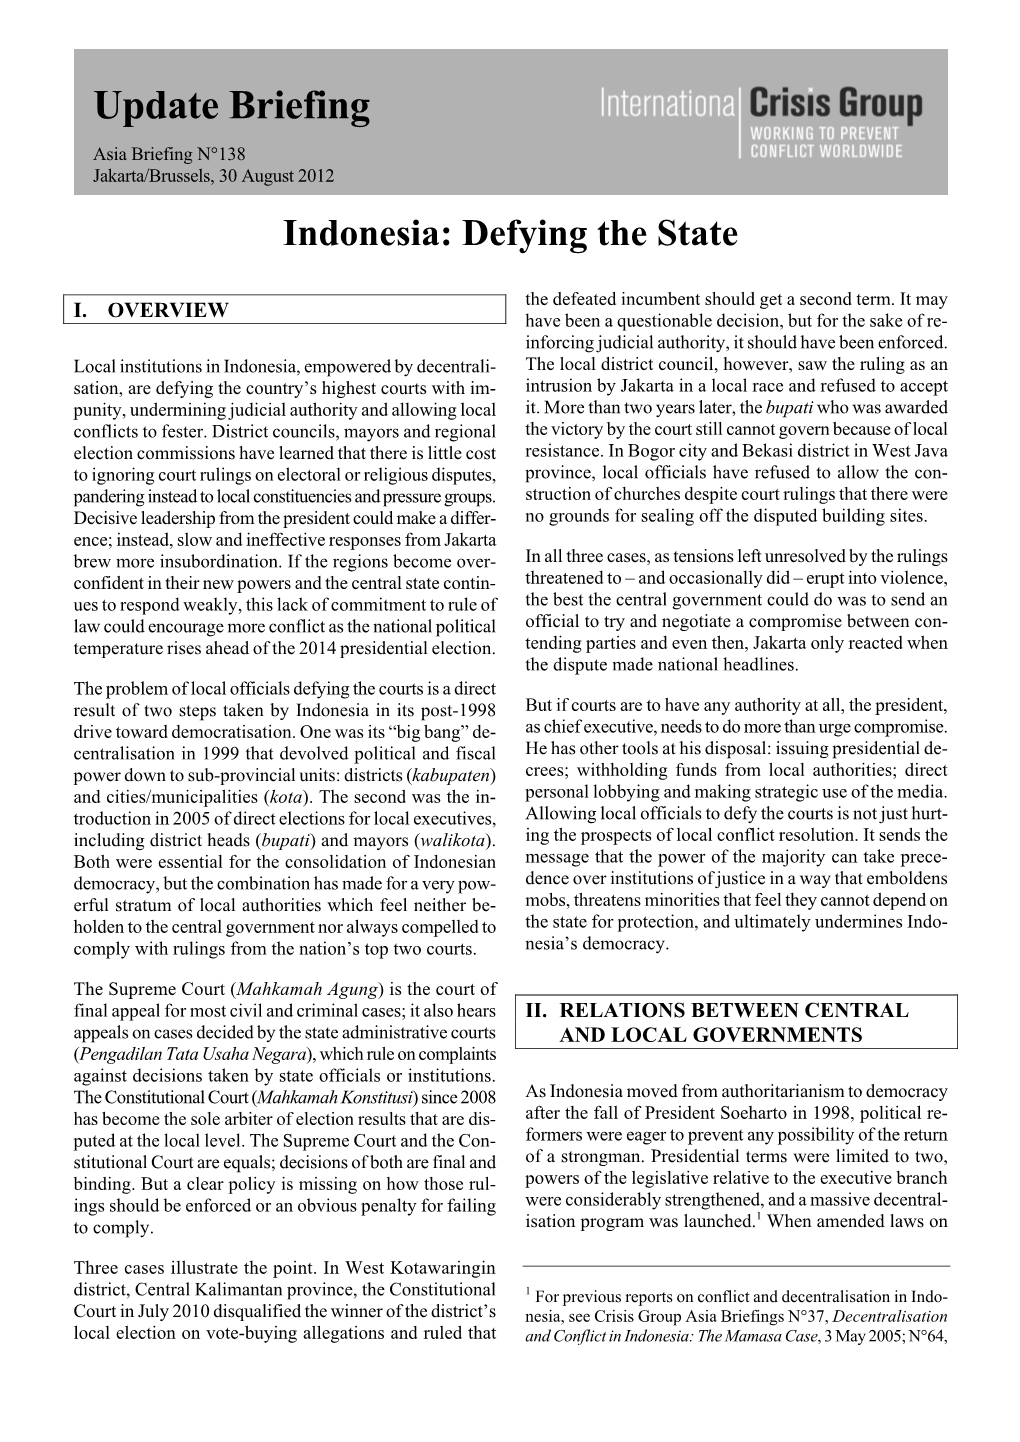 Update Briefing Asia Briefing N°138 Jakarta/Brussels, 30 August 2012 Indonesia: Defying the State